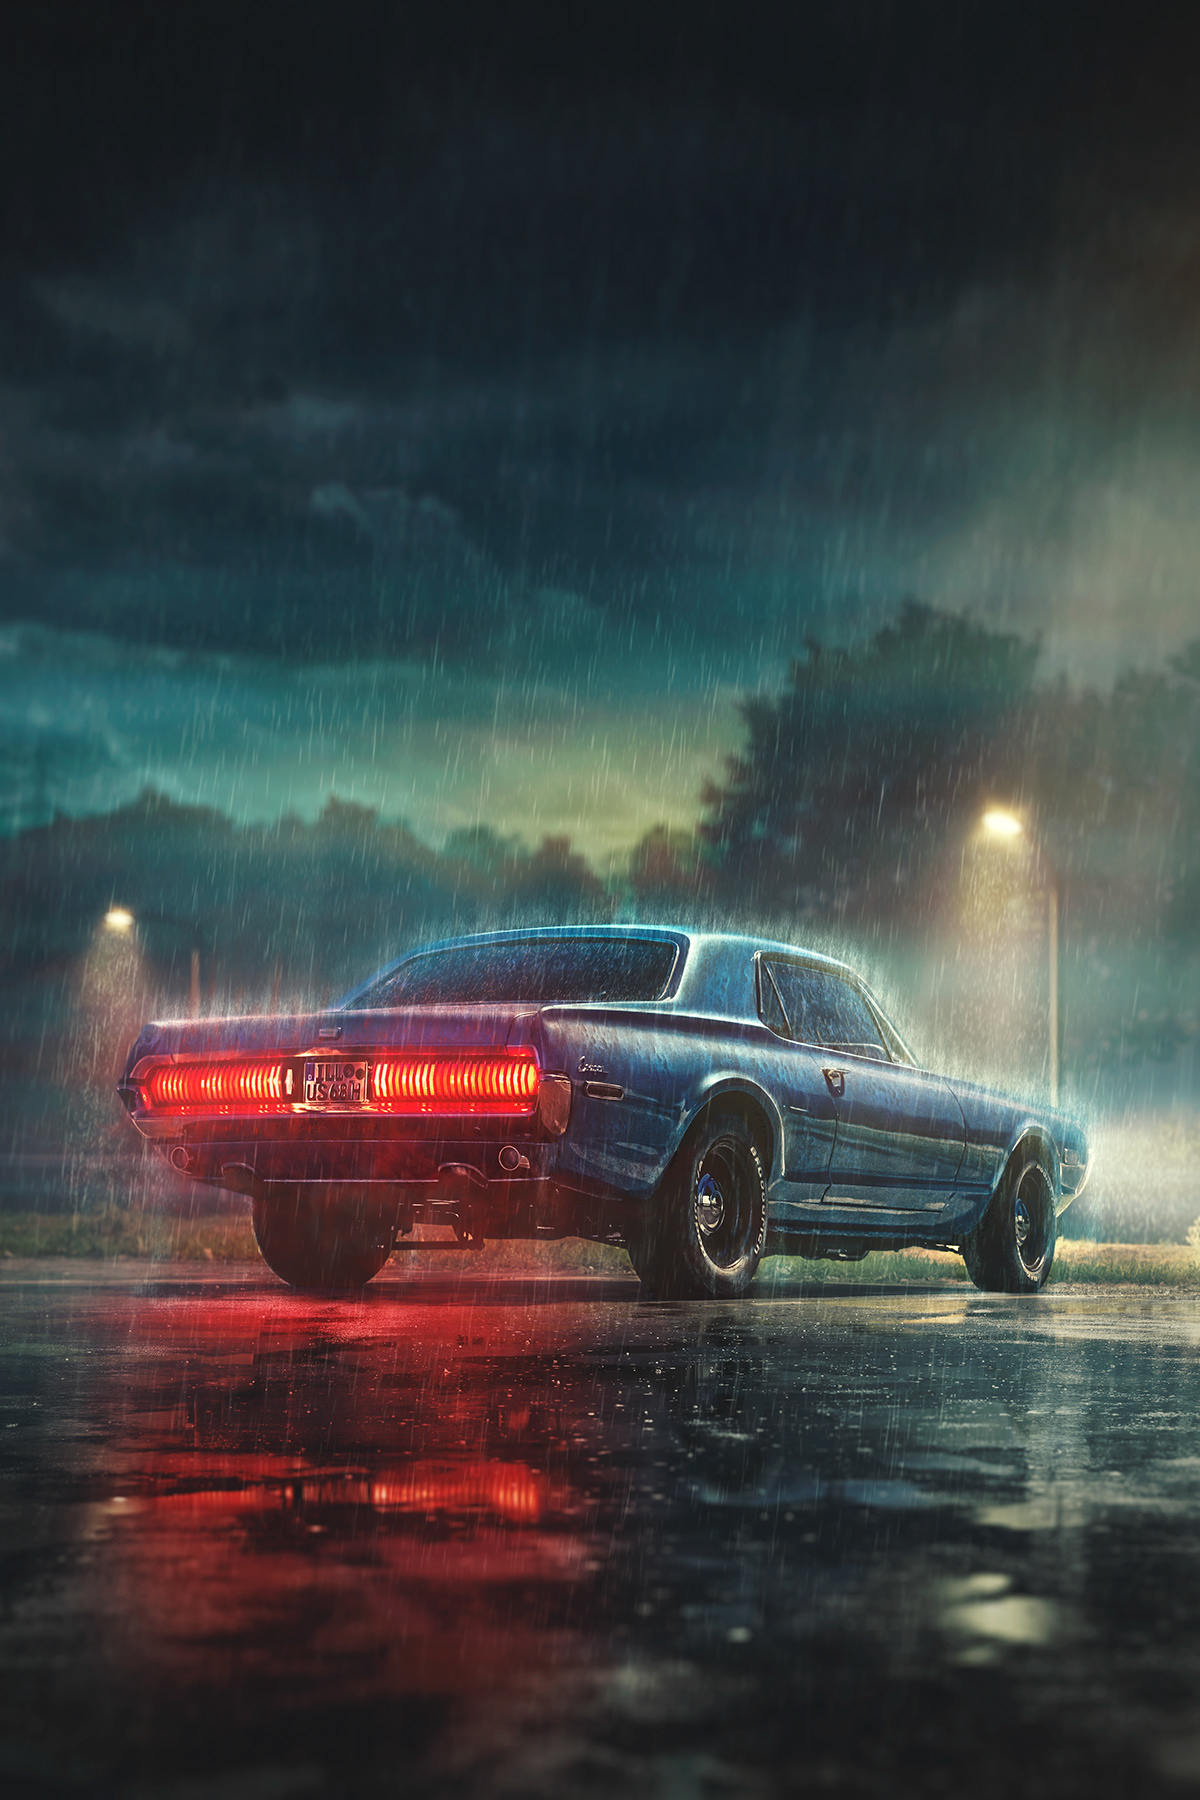 1968 Mercury Cougar in rain at night on the side of a street